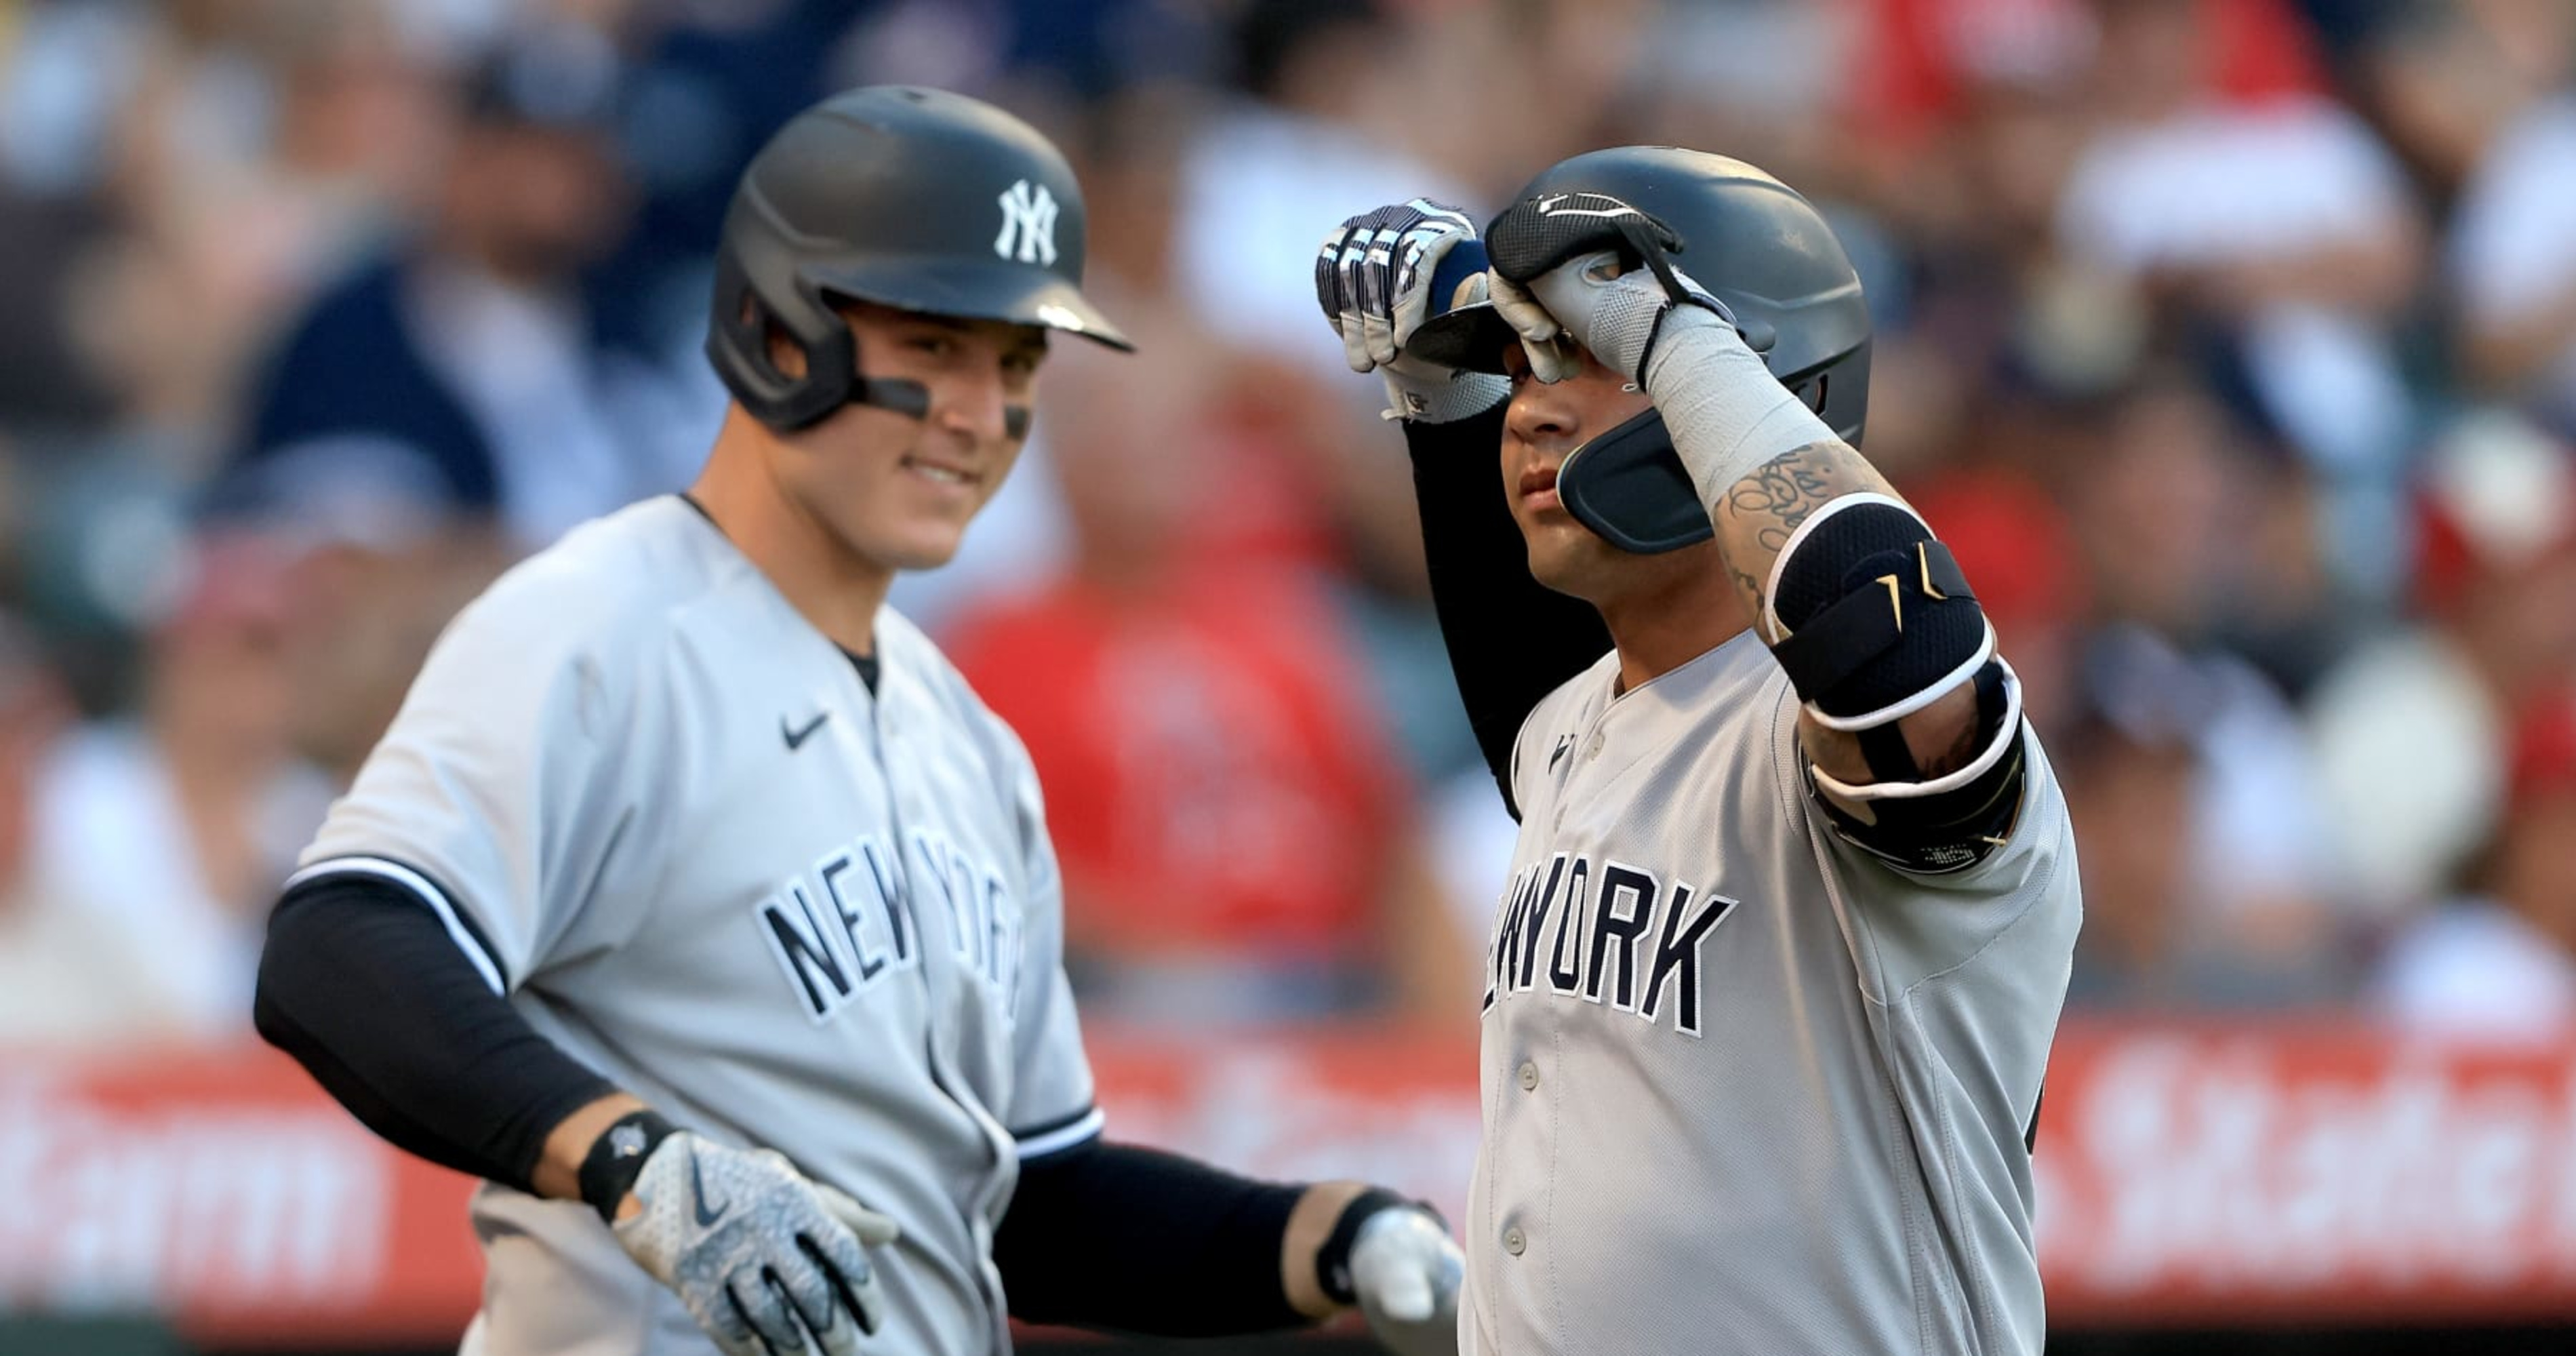 New York Yankees could be sellers ahead of MLB trade deadline, 4